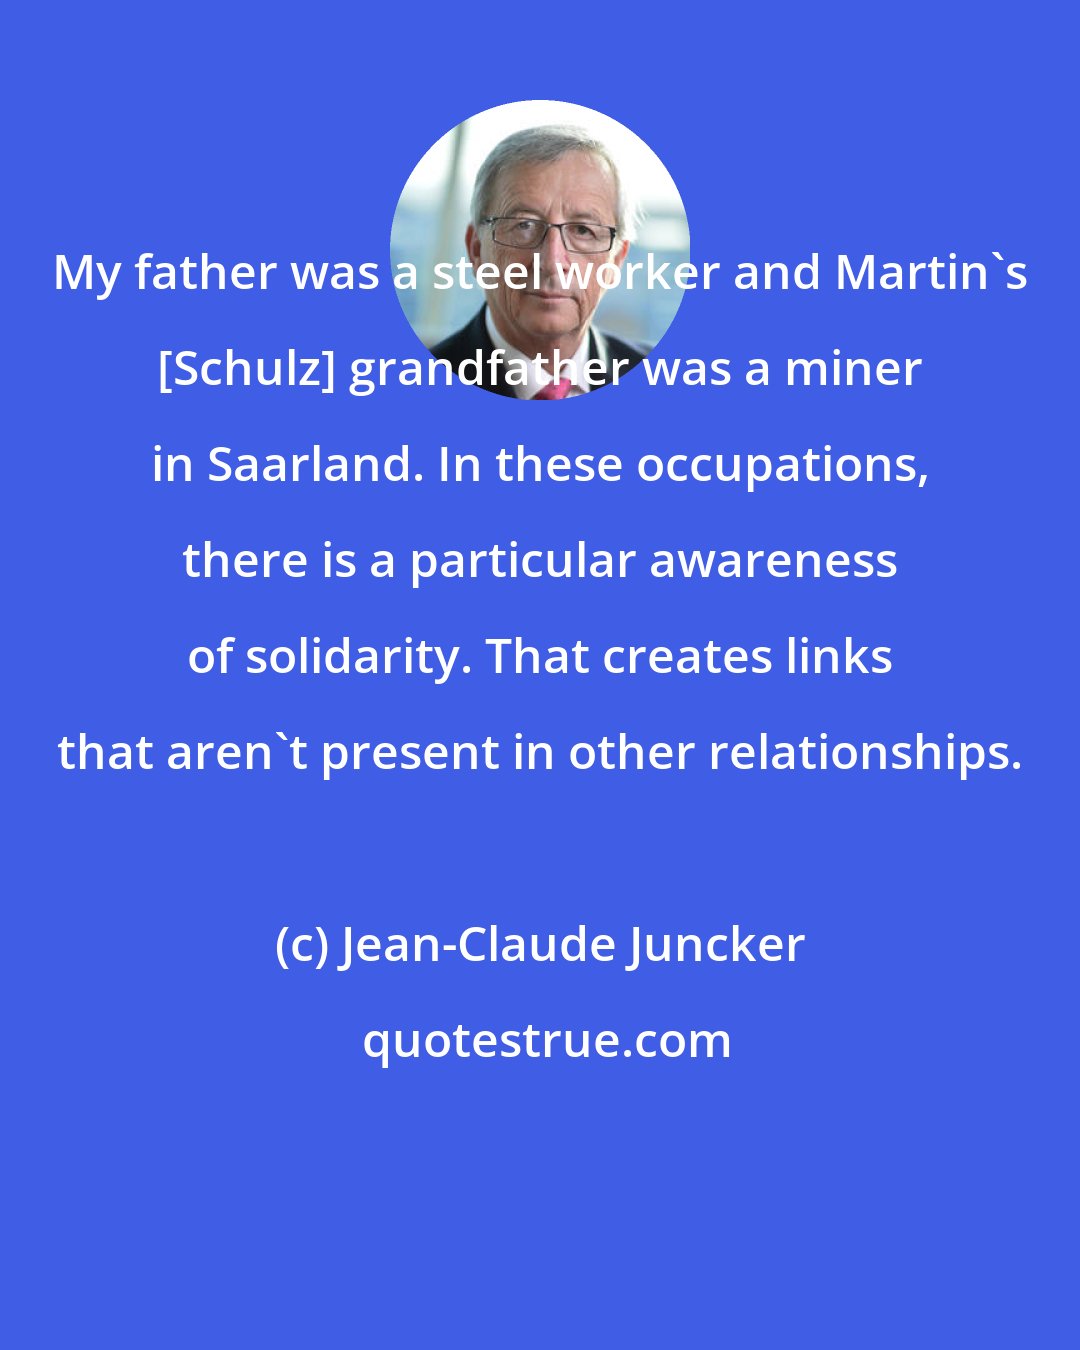 Jean-Claude Juncker: My father was a steel worker and Martin's [Schulz] grandfather was a miner in Saarland. In these occupations, there is a particular awareness of solidarity. That creates links that aren't present in other relationships.